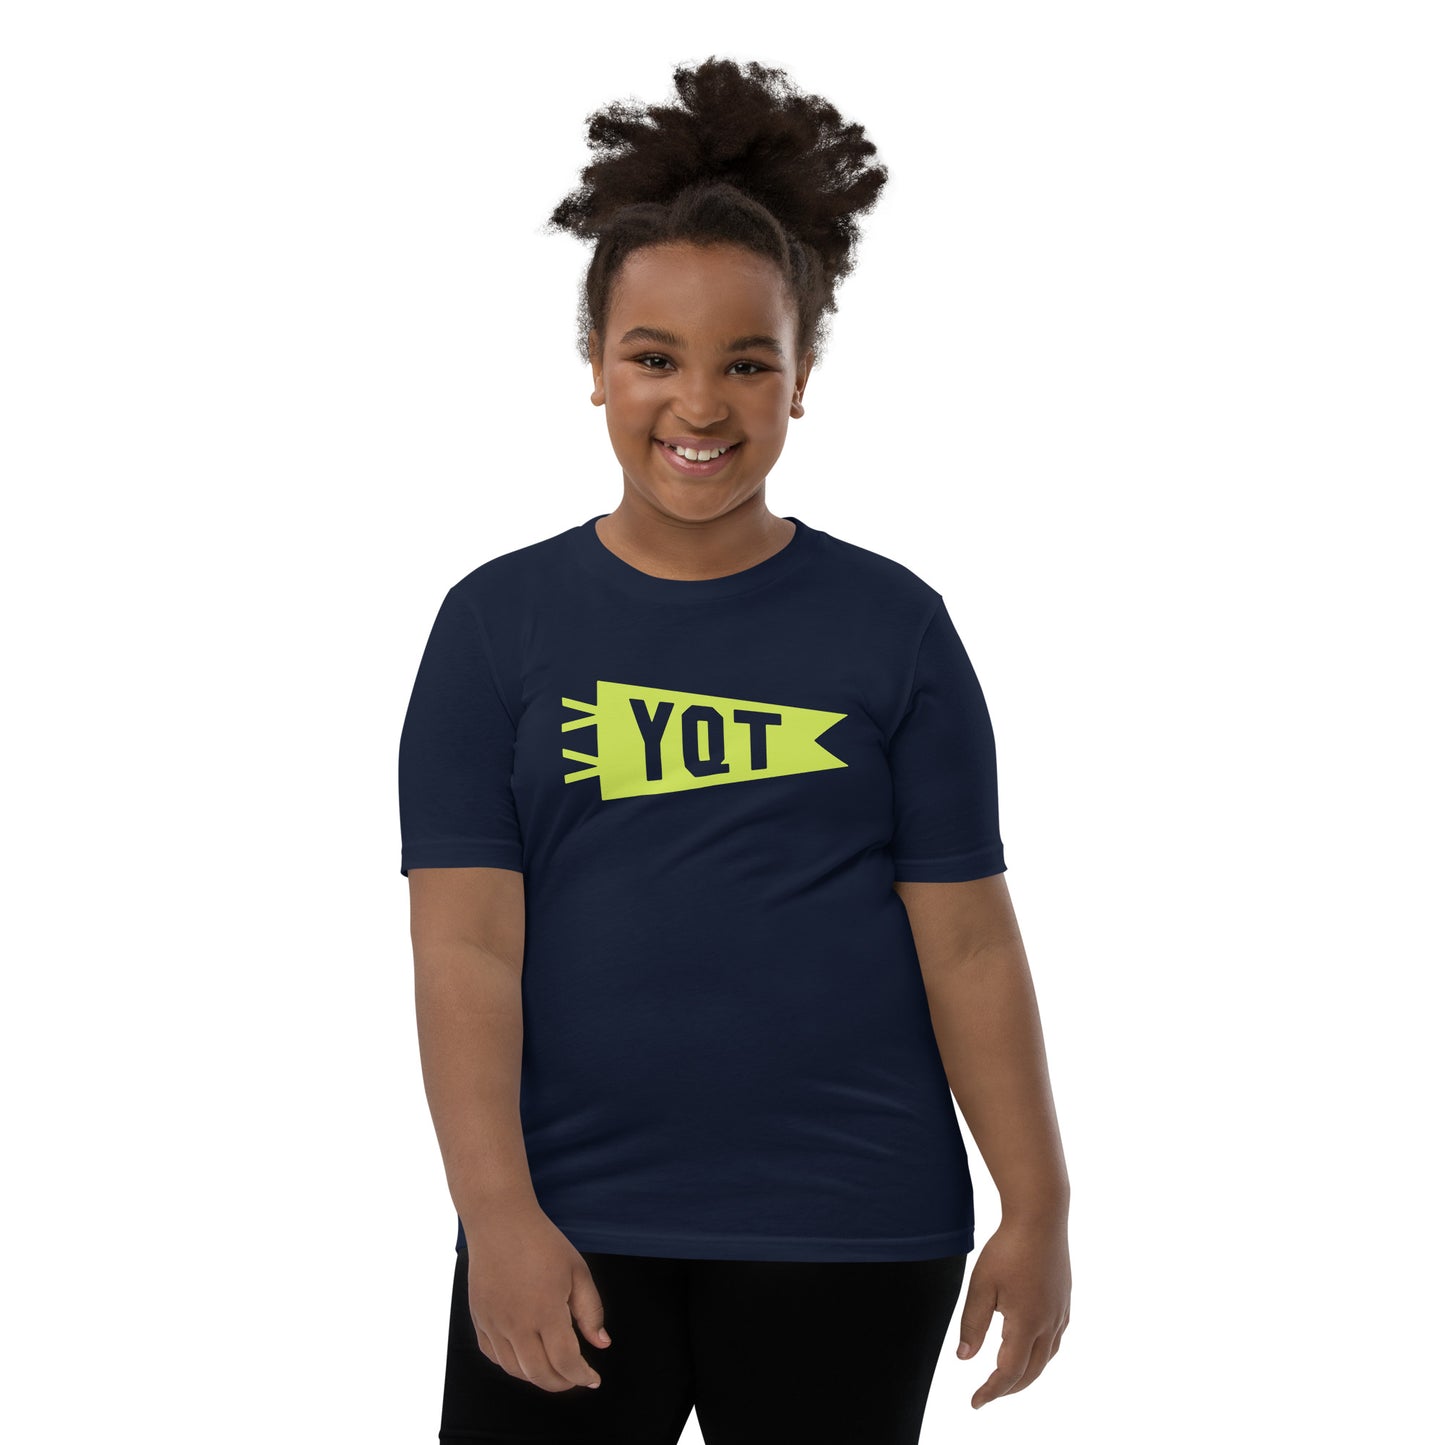 Kid's Airport Code Tee - Green Graphic • YQT Thunder Bay • YHM Designs - Image 05